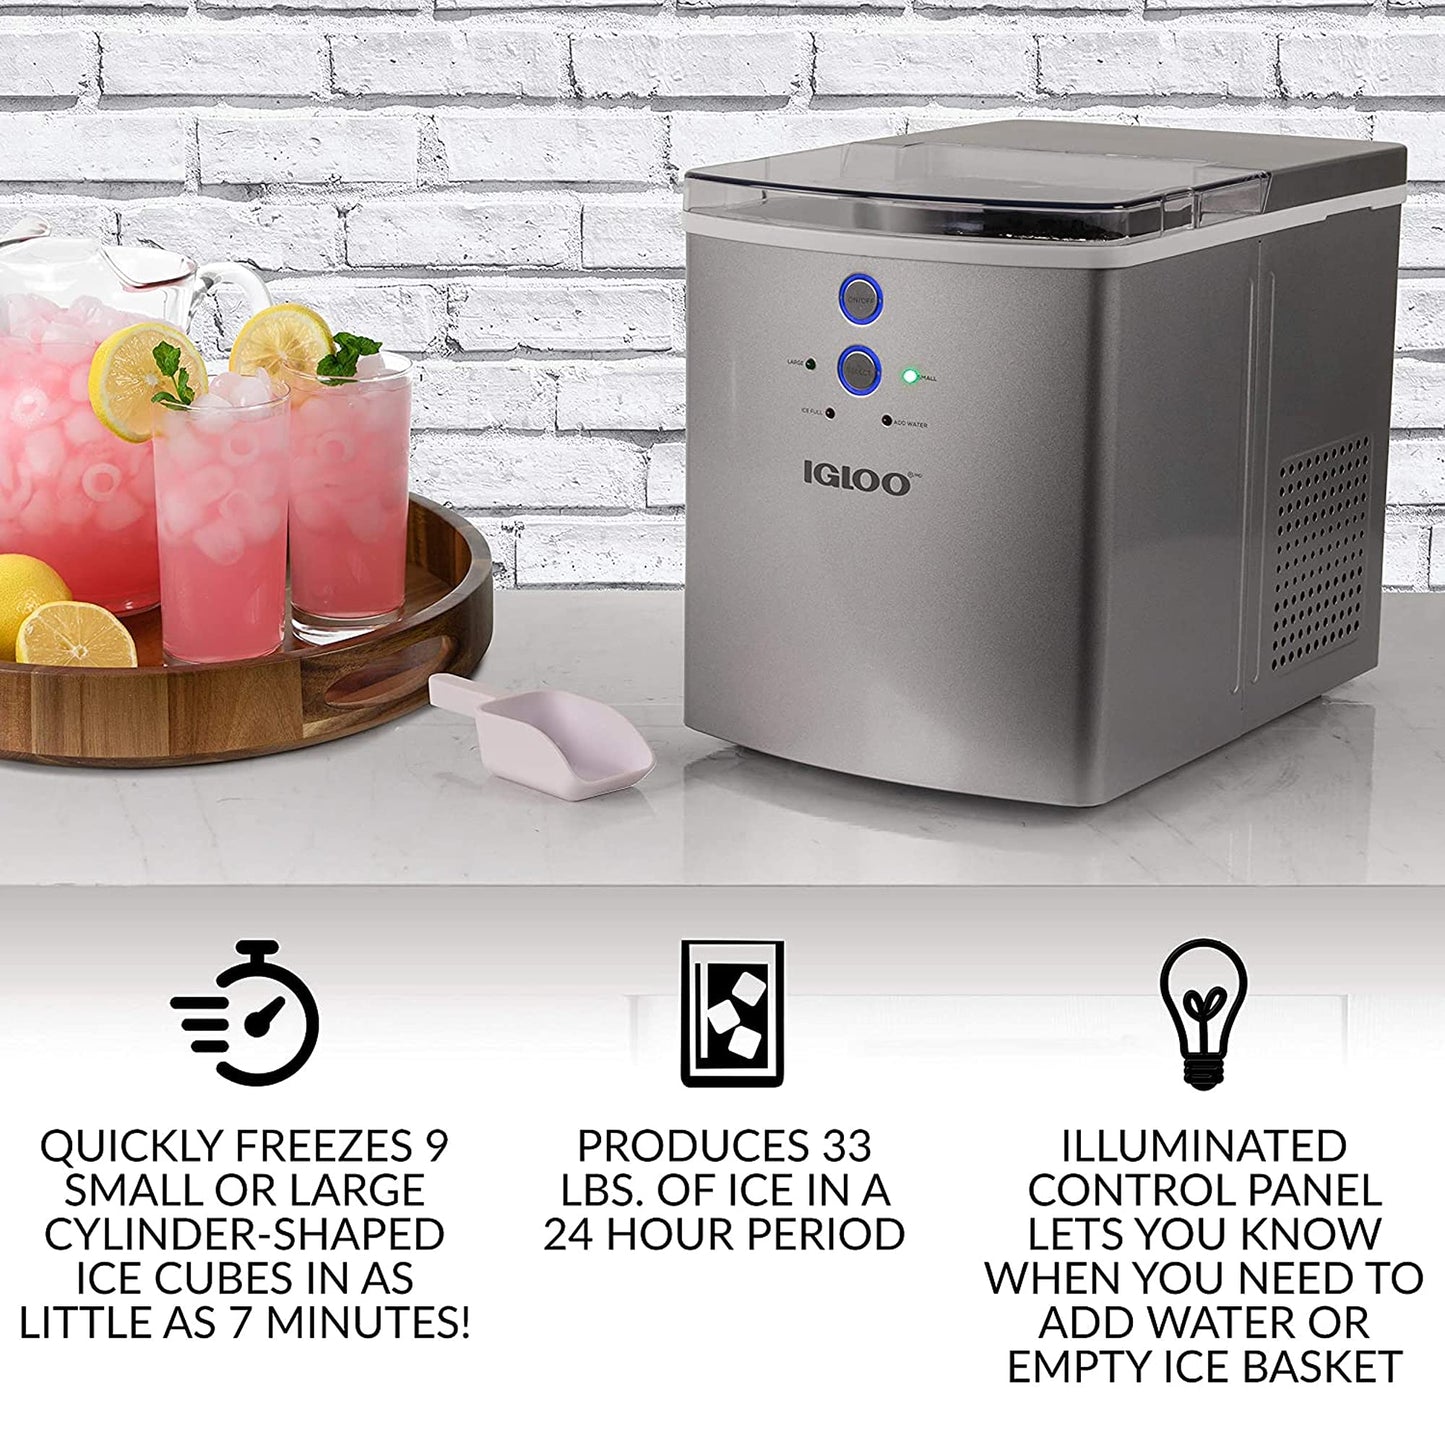 Igloo ICEB33SL Large-Capacity Automatic Portable Electric Countertop Ice Maker Machine, 33 Pounds in 24 Hours, 9 Ice Cubes Ready in 7 minutes